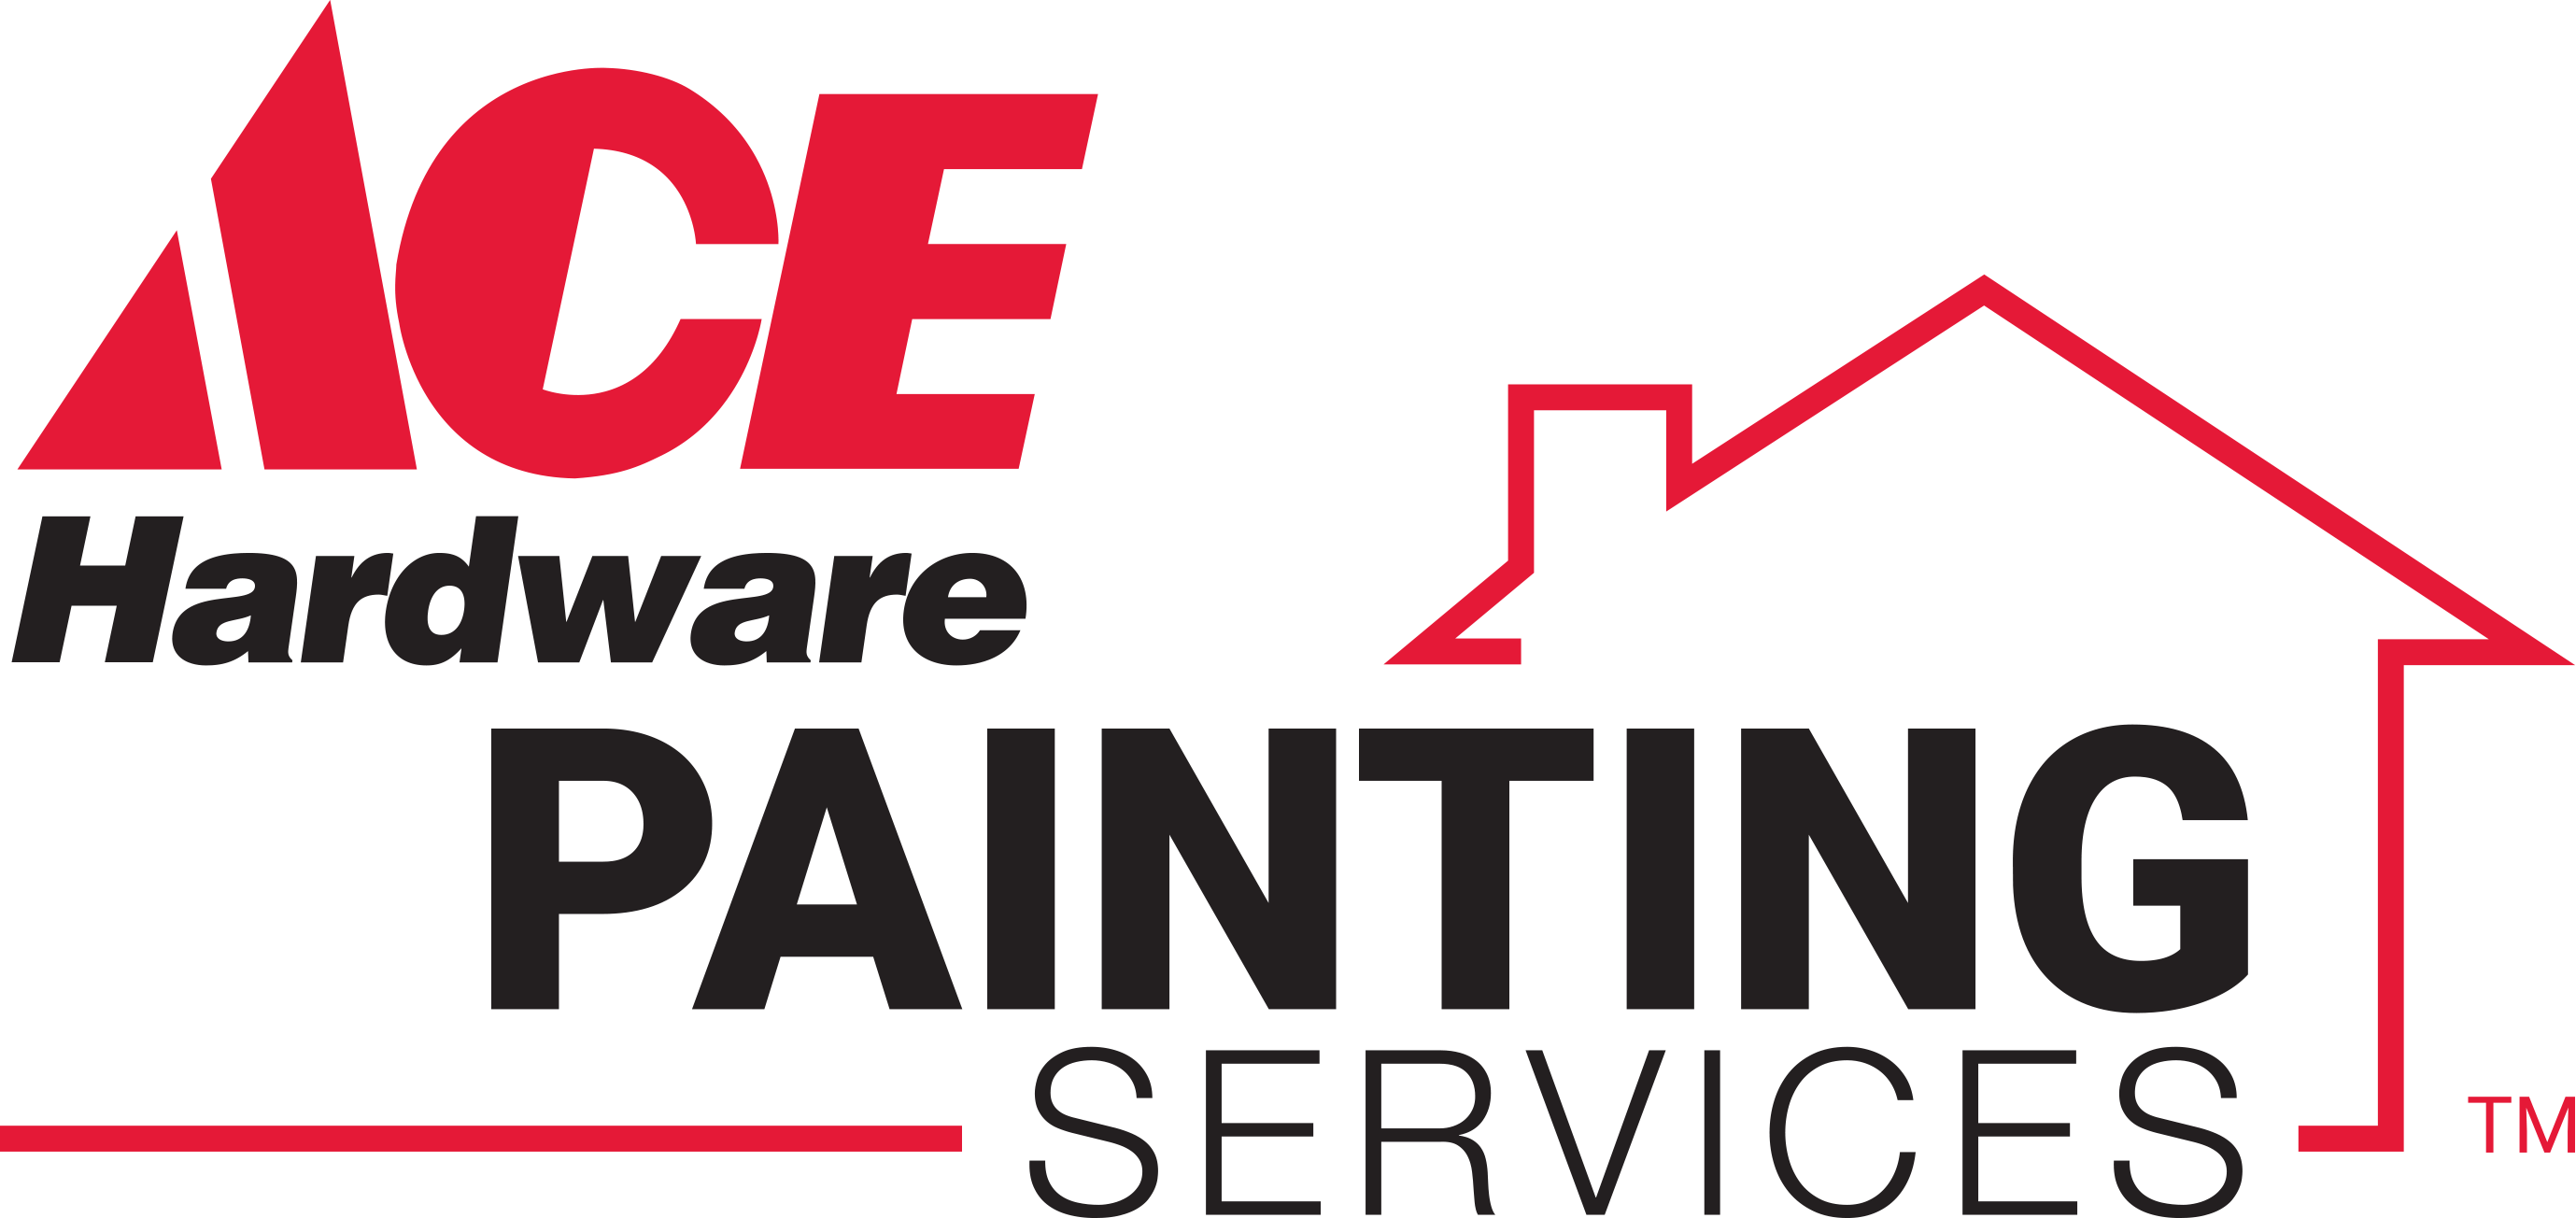 ACE HARDWARE PAINTING SERVICES logo